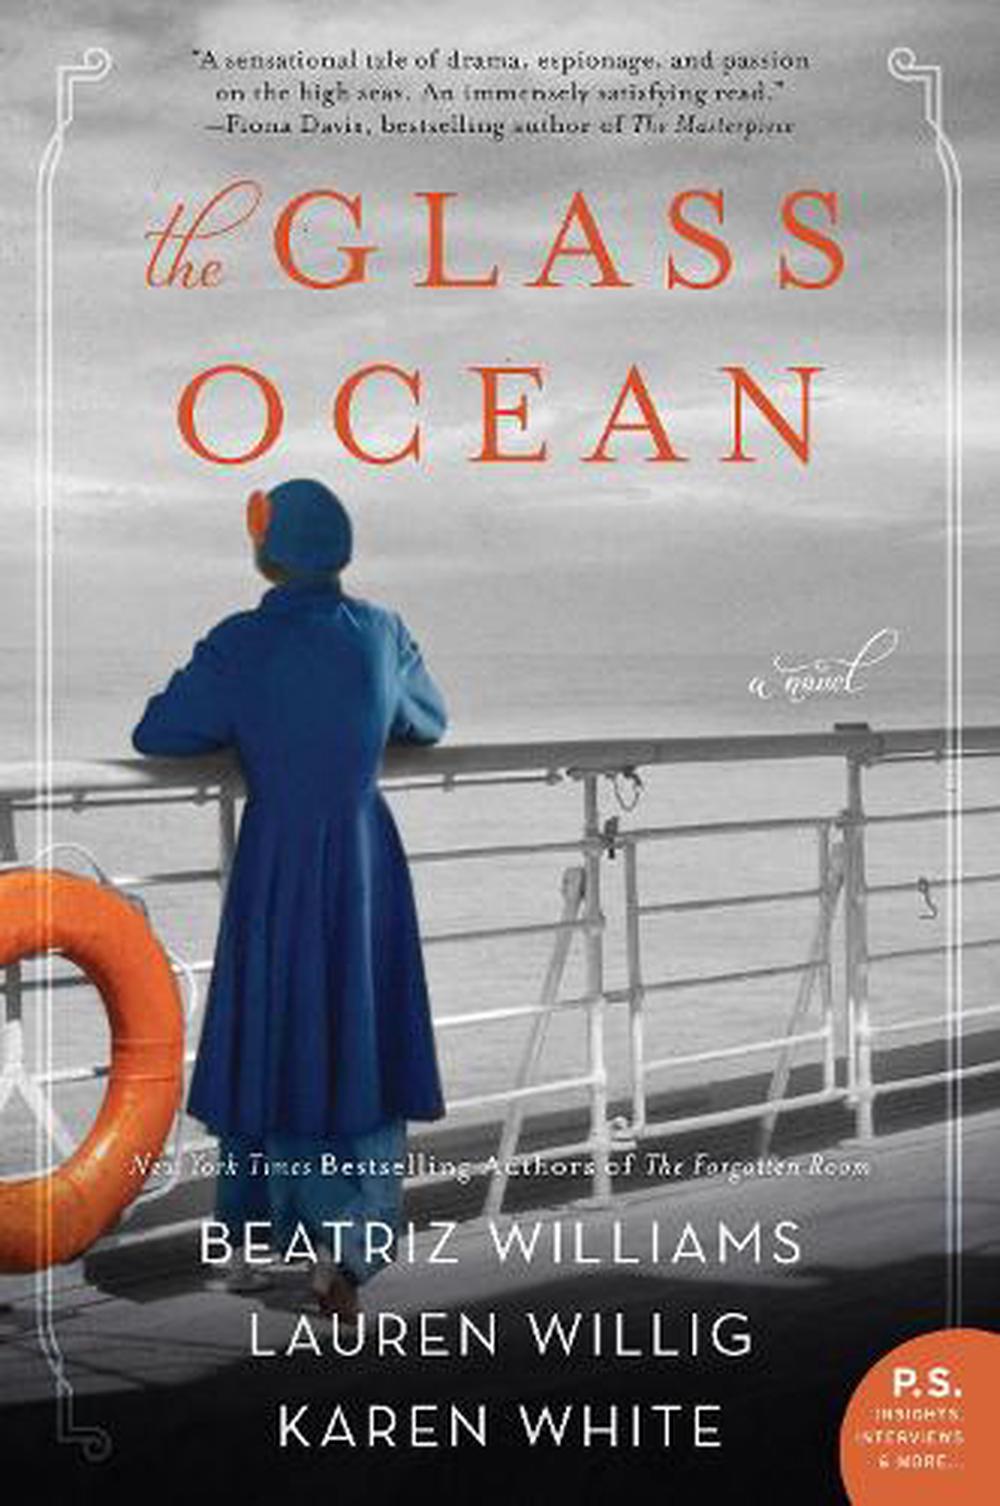 The Glass Ocean by Beatriz Williams